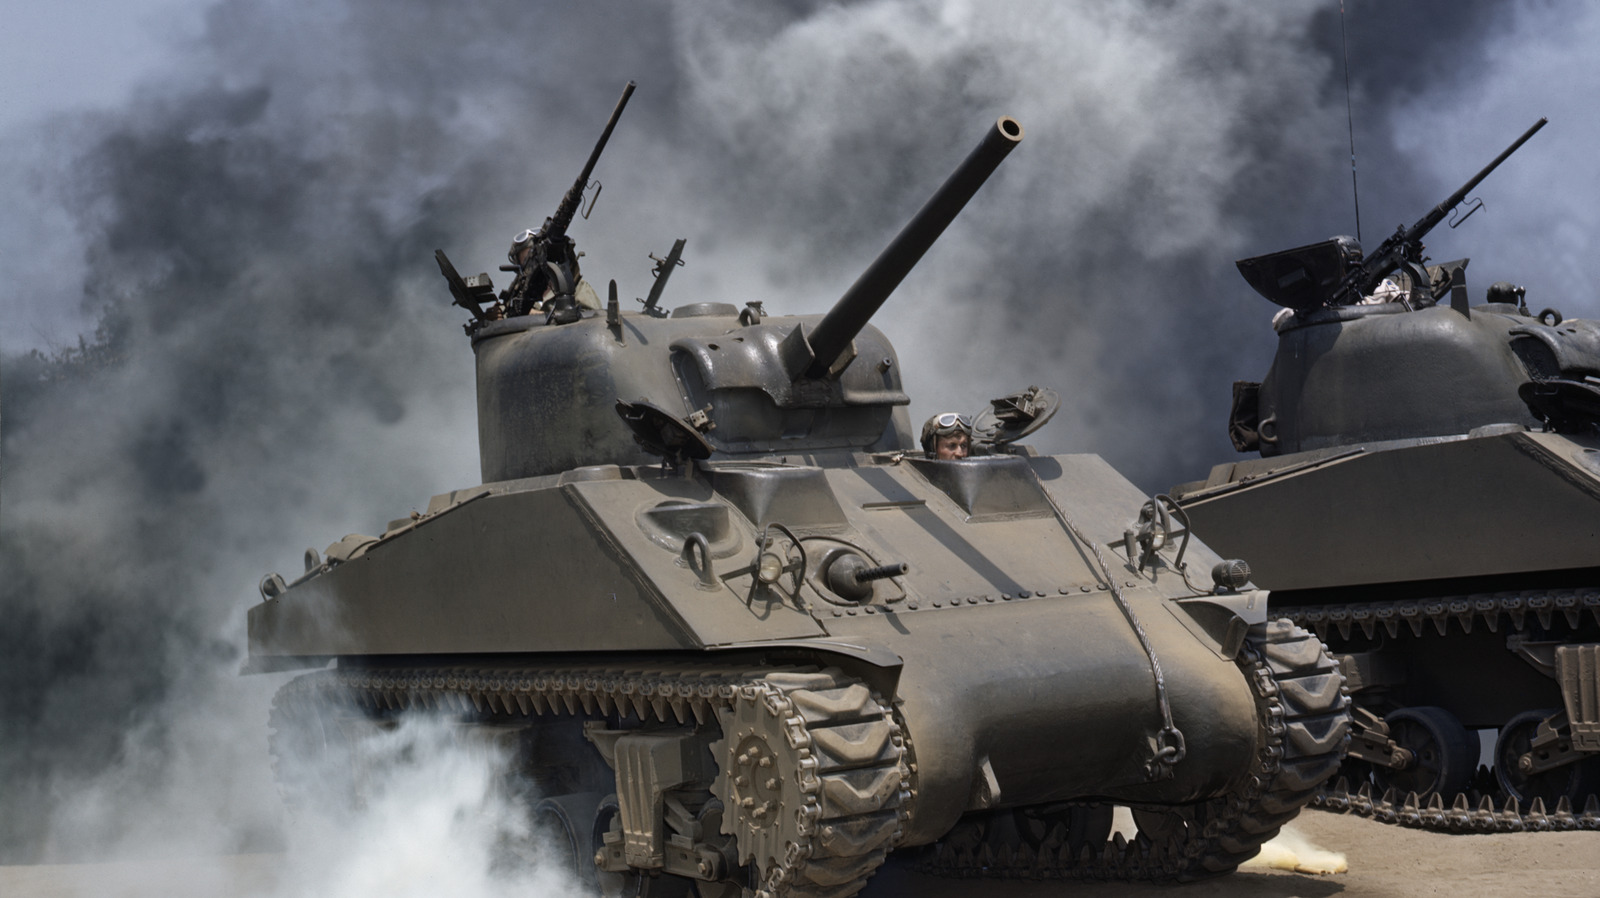 Why The M4 Sherman Dominated The Battlefield Long After WW2